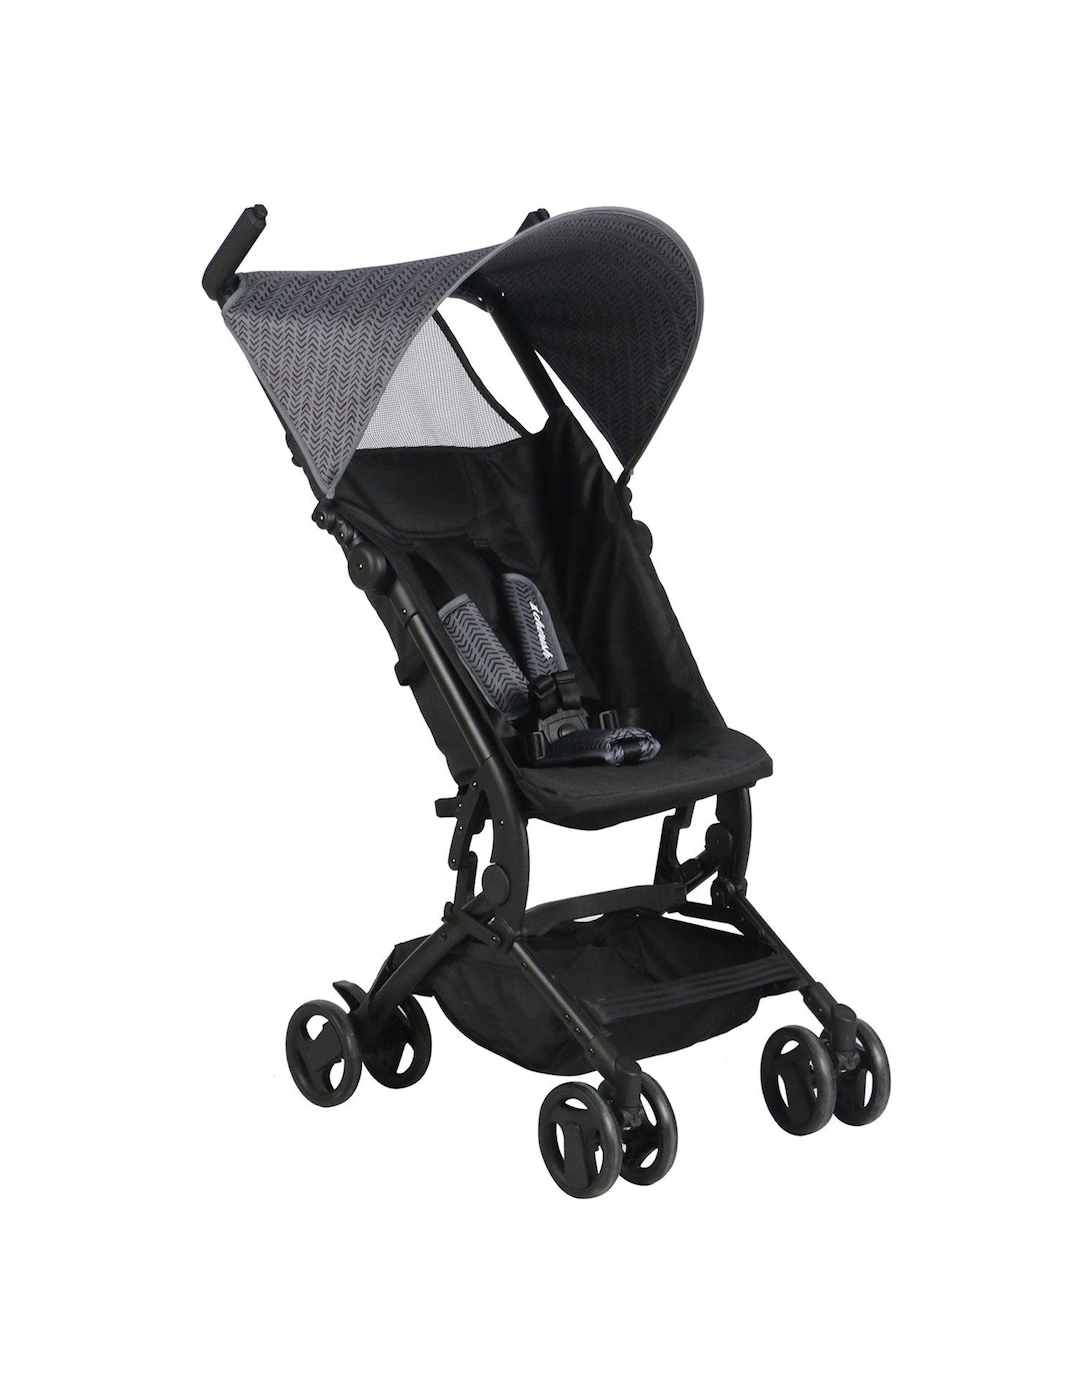 MBX5 Ultra Compact Stroller - Black, 2 of 1